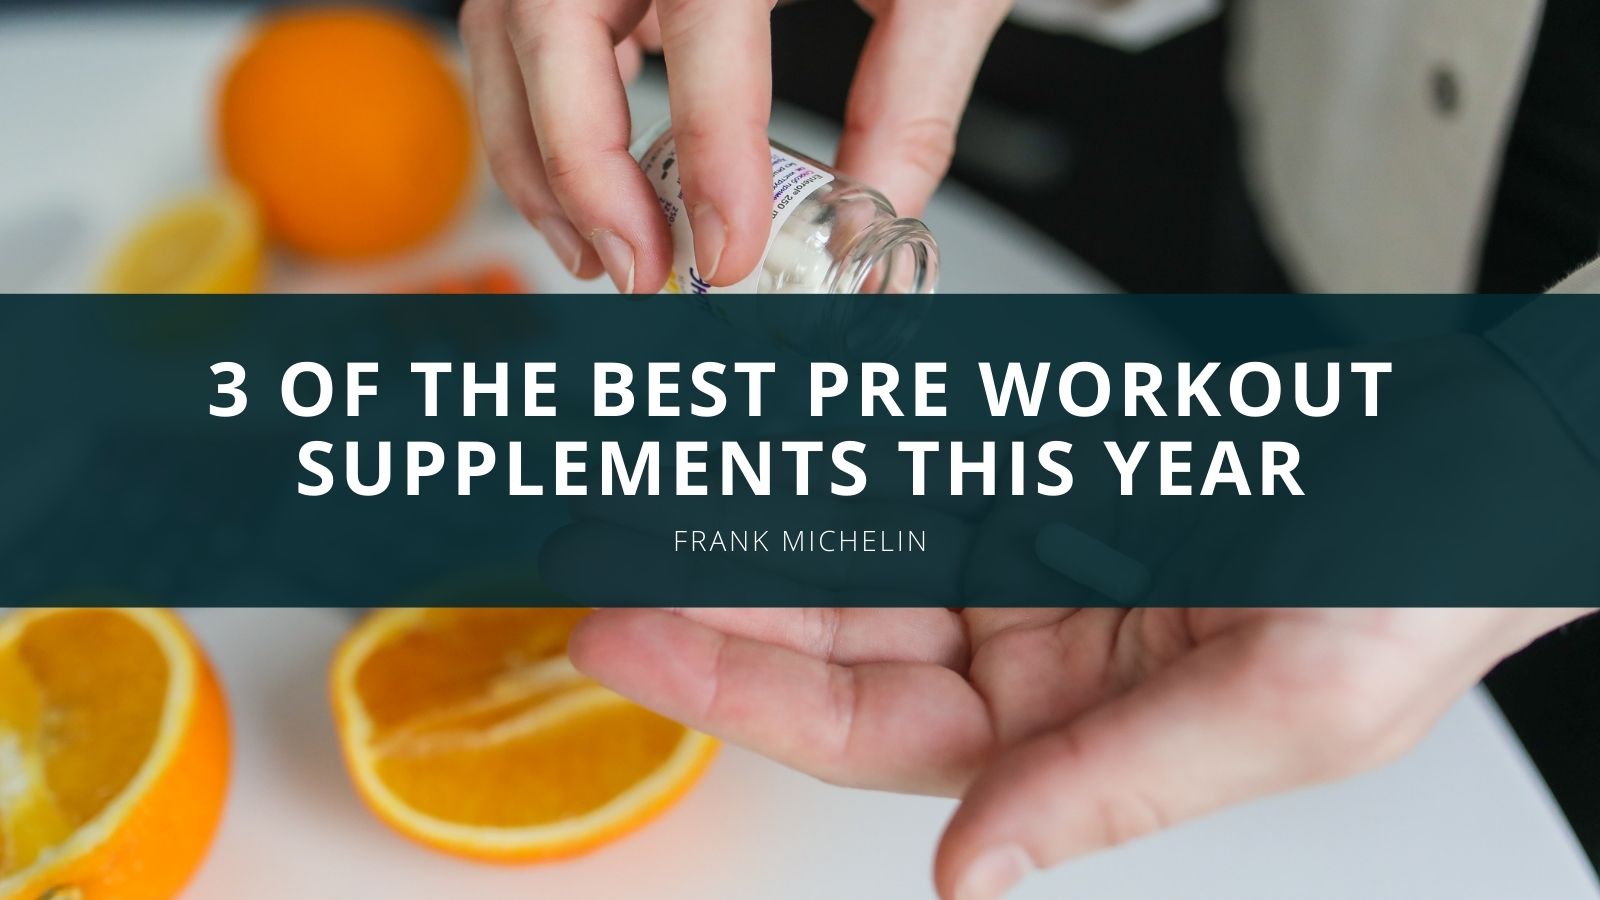 3 OF THE BEST PRE WORKOUT

SUPPLEMENTS THIS YEAR

FRANK MICHELIN